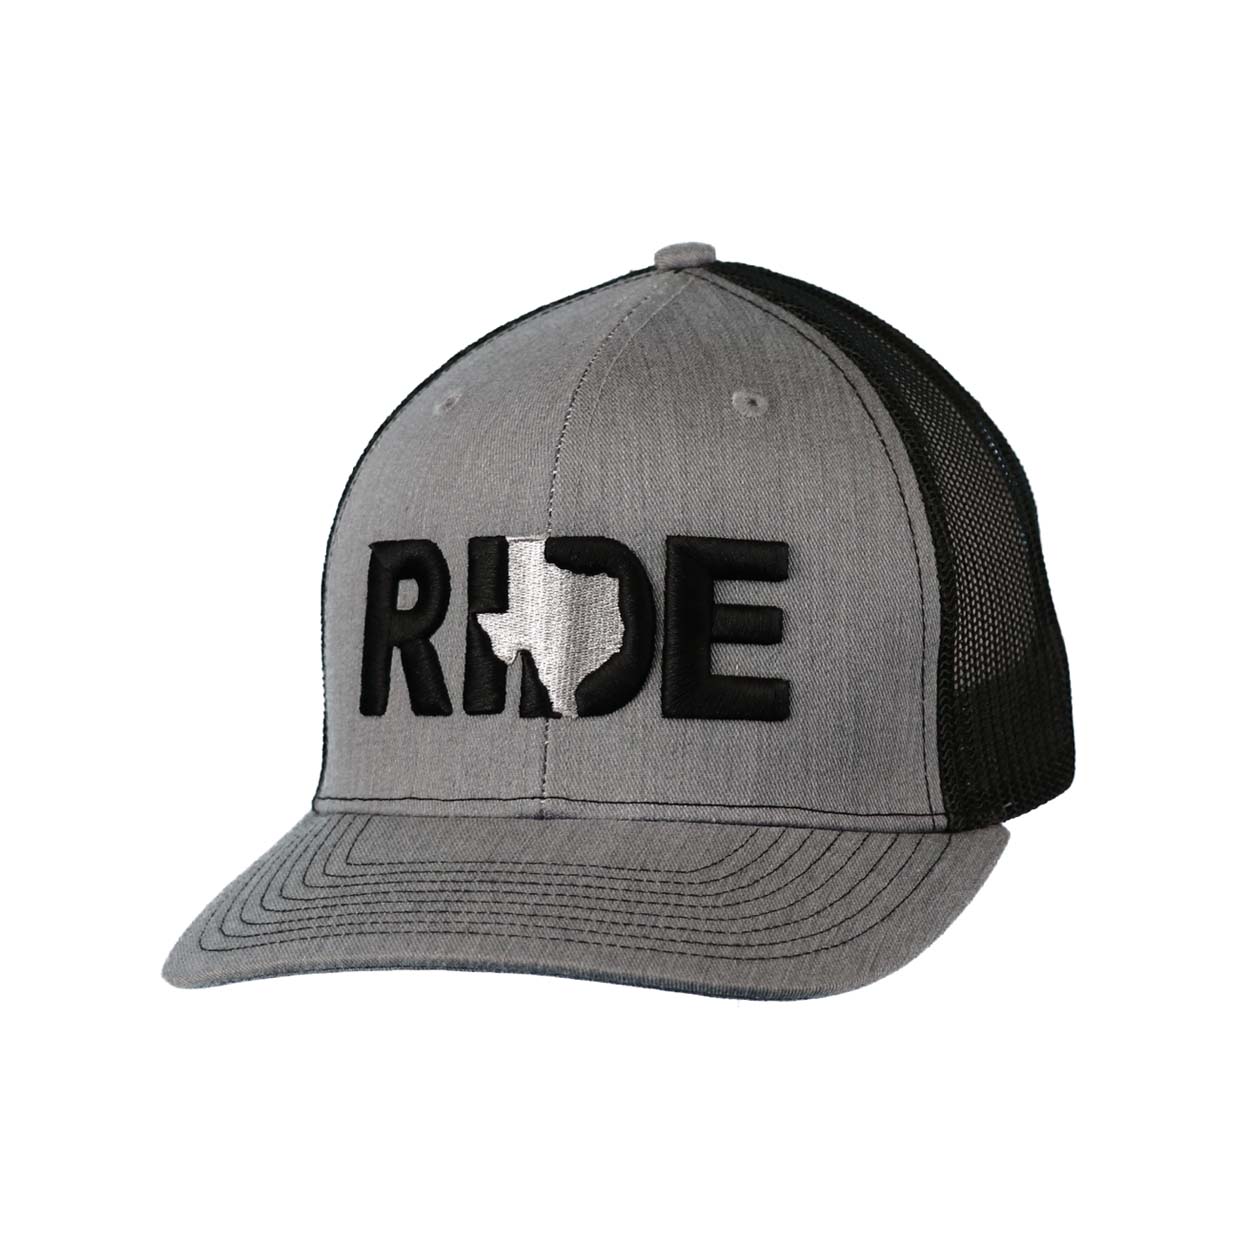 Ride Texas Classic Embroidered Snapback Trucker Hat Heather Gray/Black